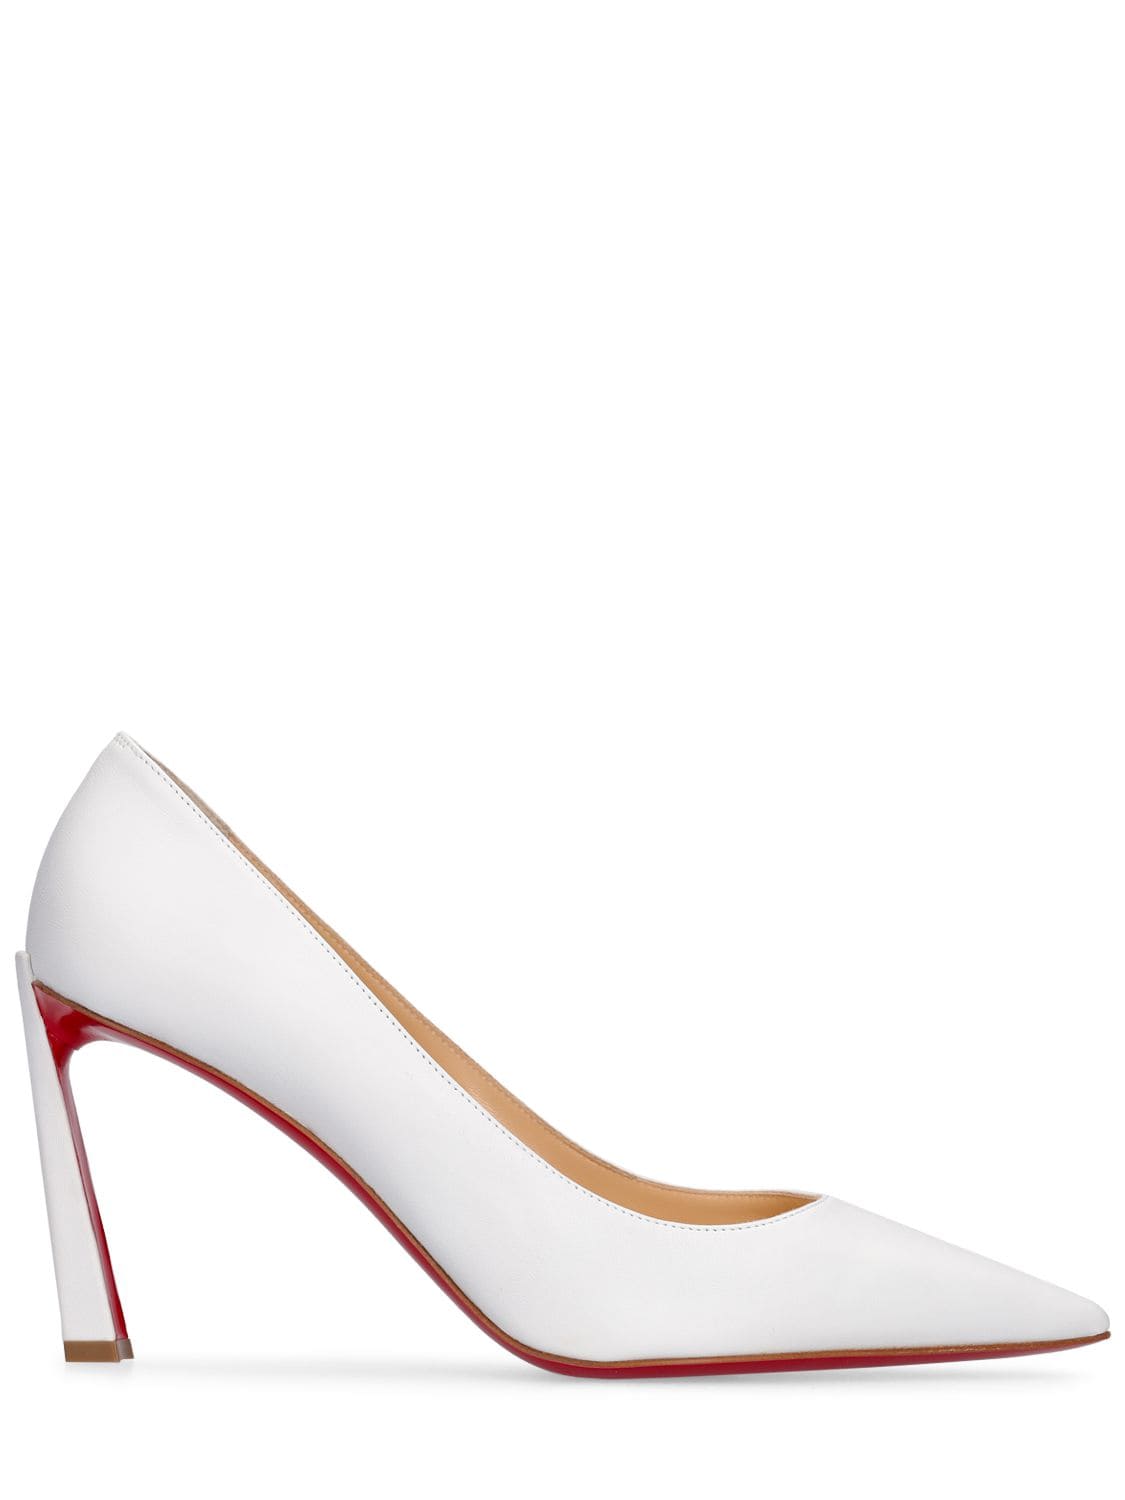 Christian Louboutin Lvr Exclusive 85mm Condora Leather Pumps In White